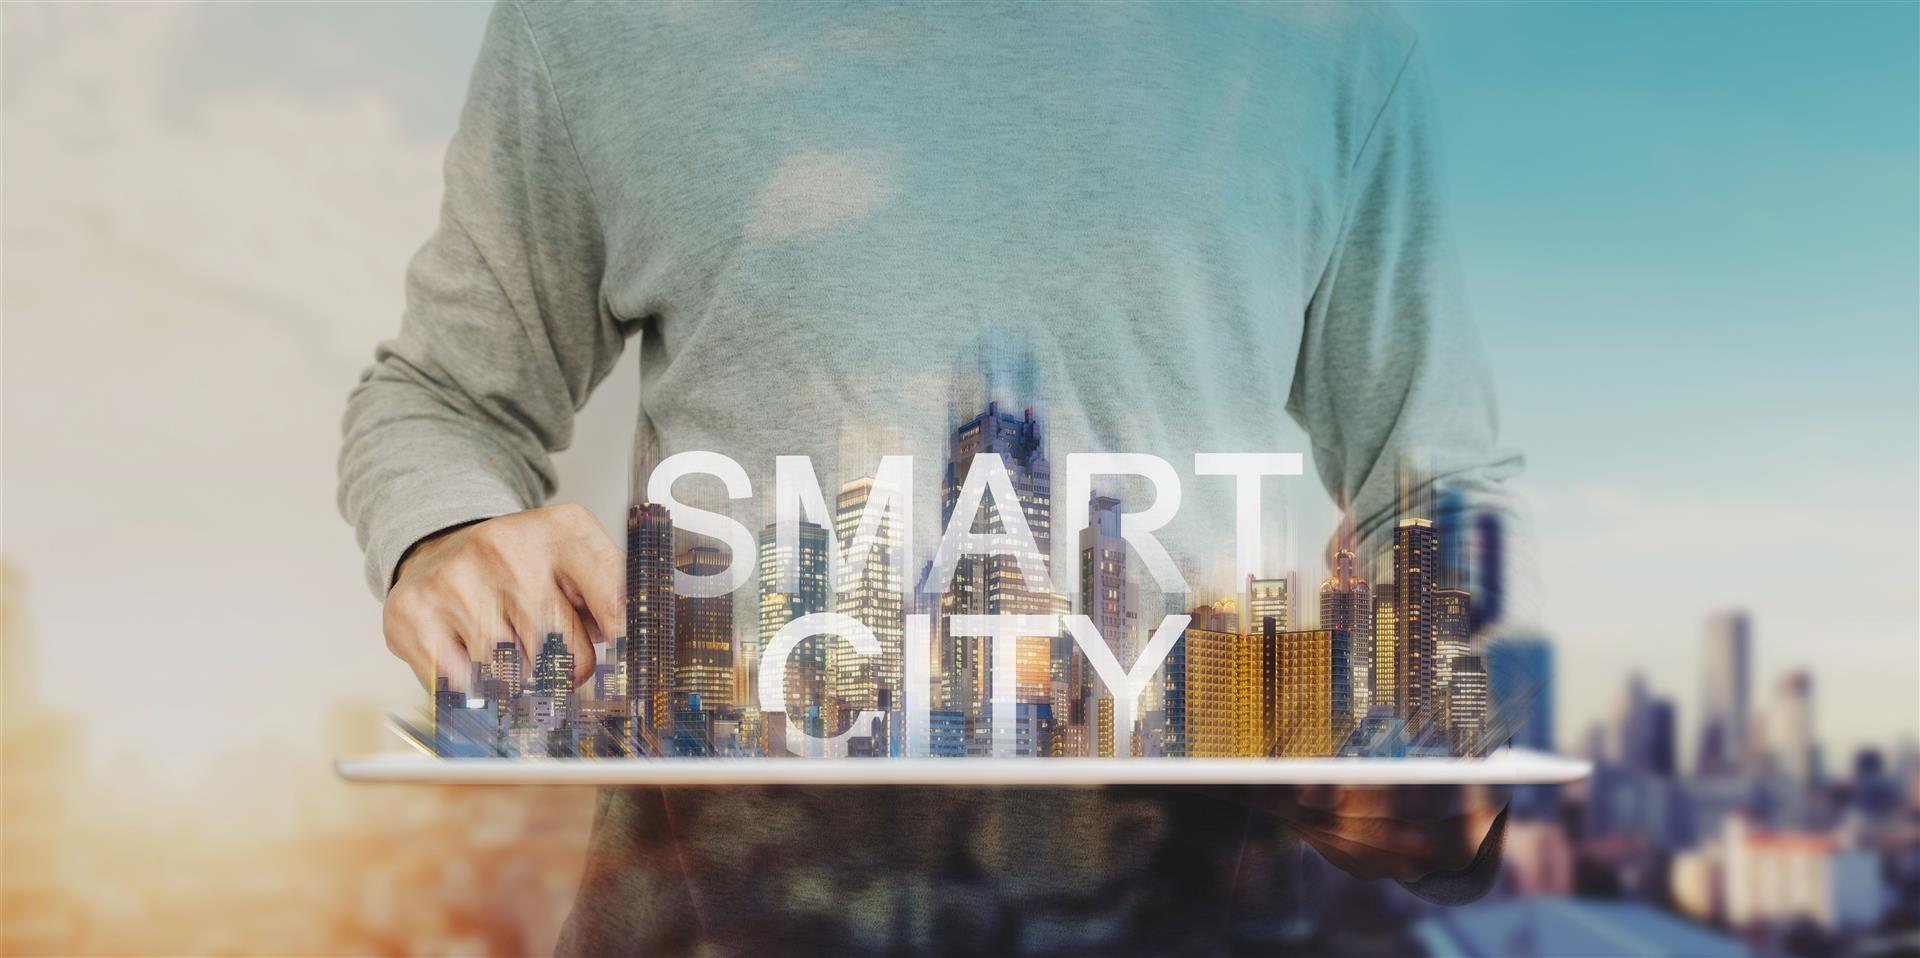 Say Hello to smart cities, winning the hearts of residents and visitors